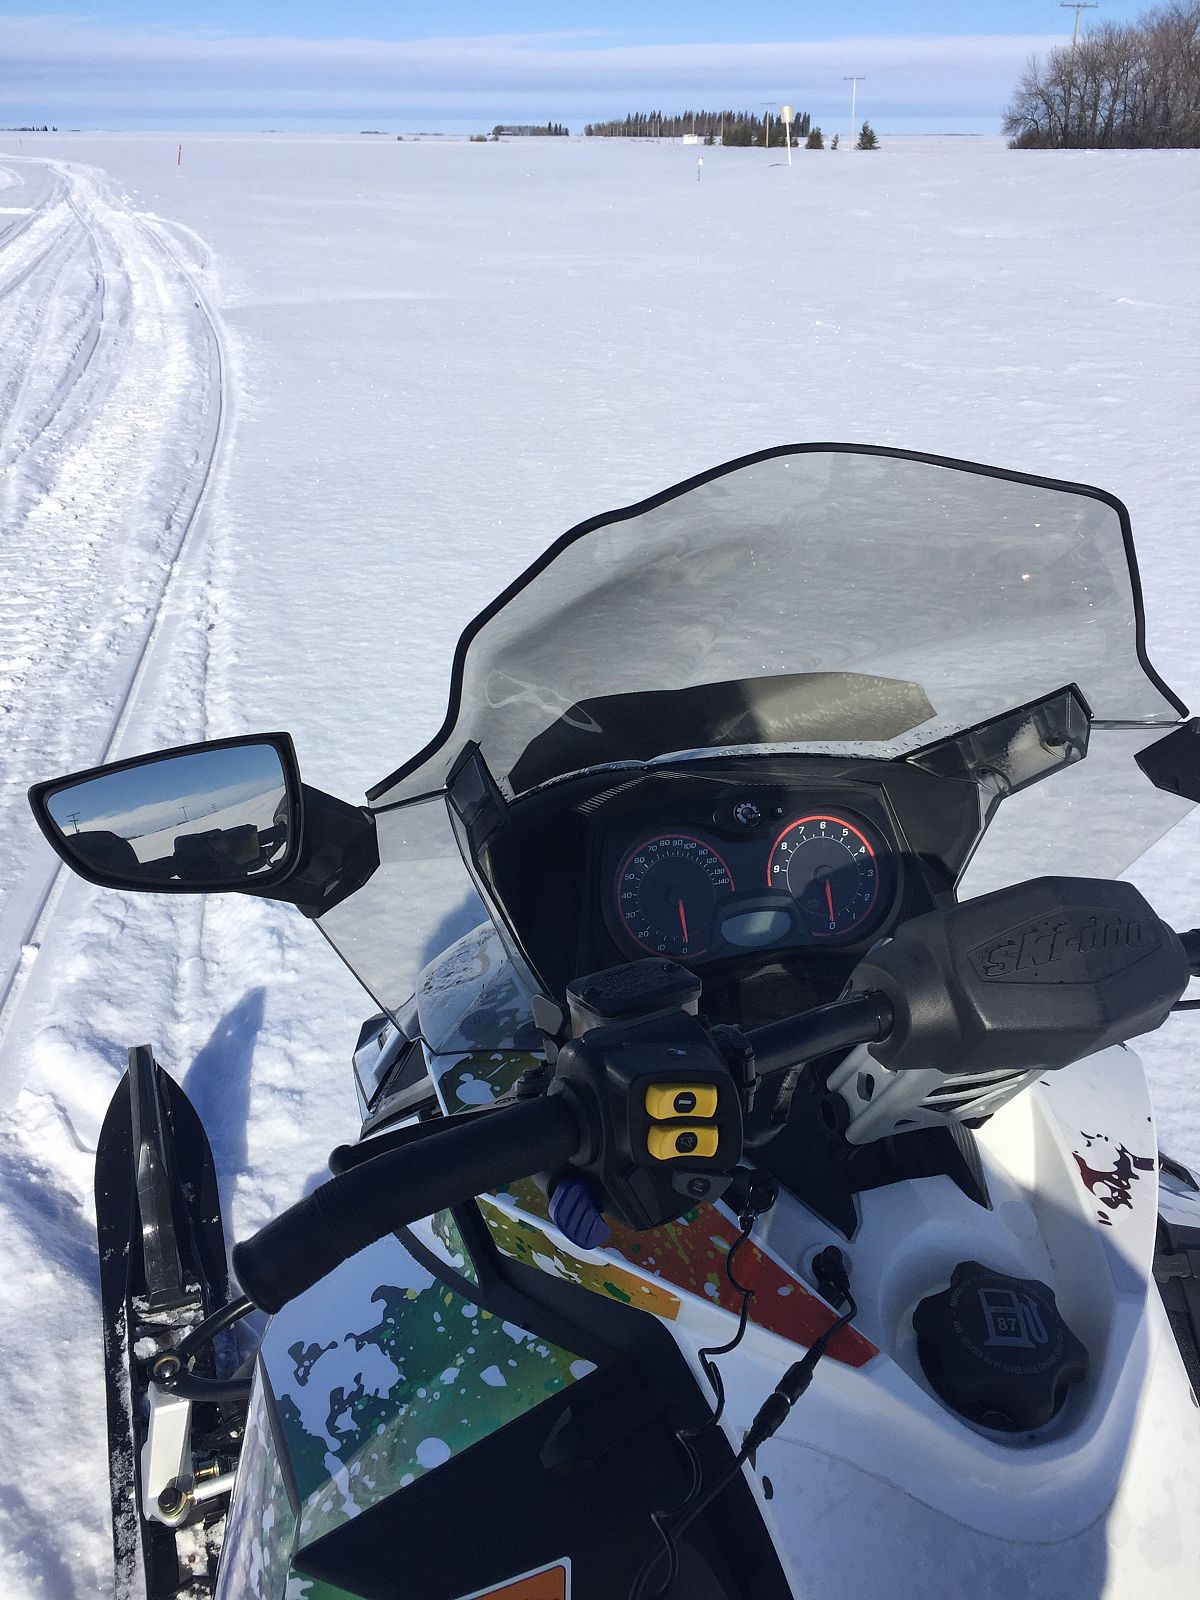 Just me and my sled cruisin in the sun, priceless